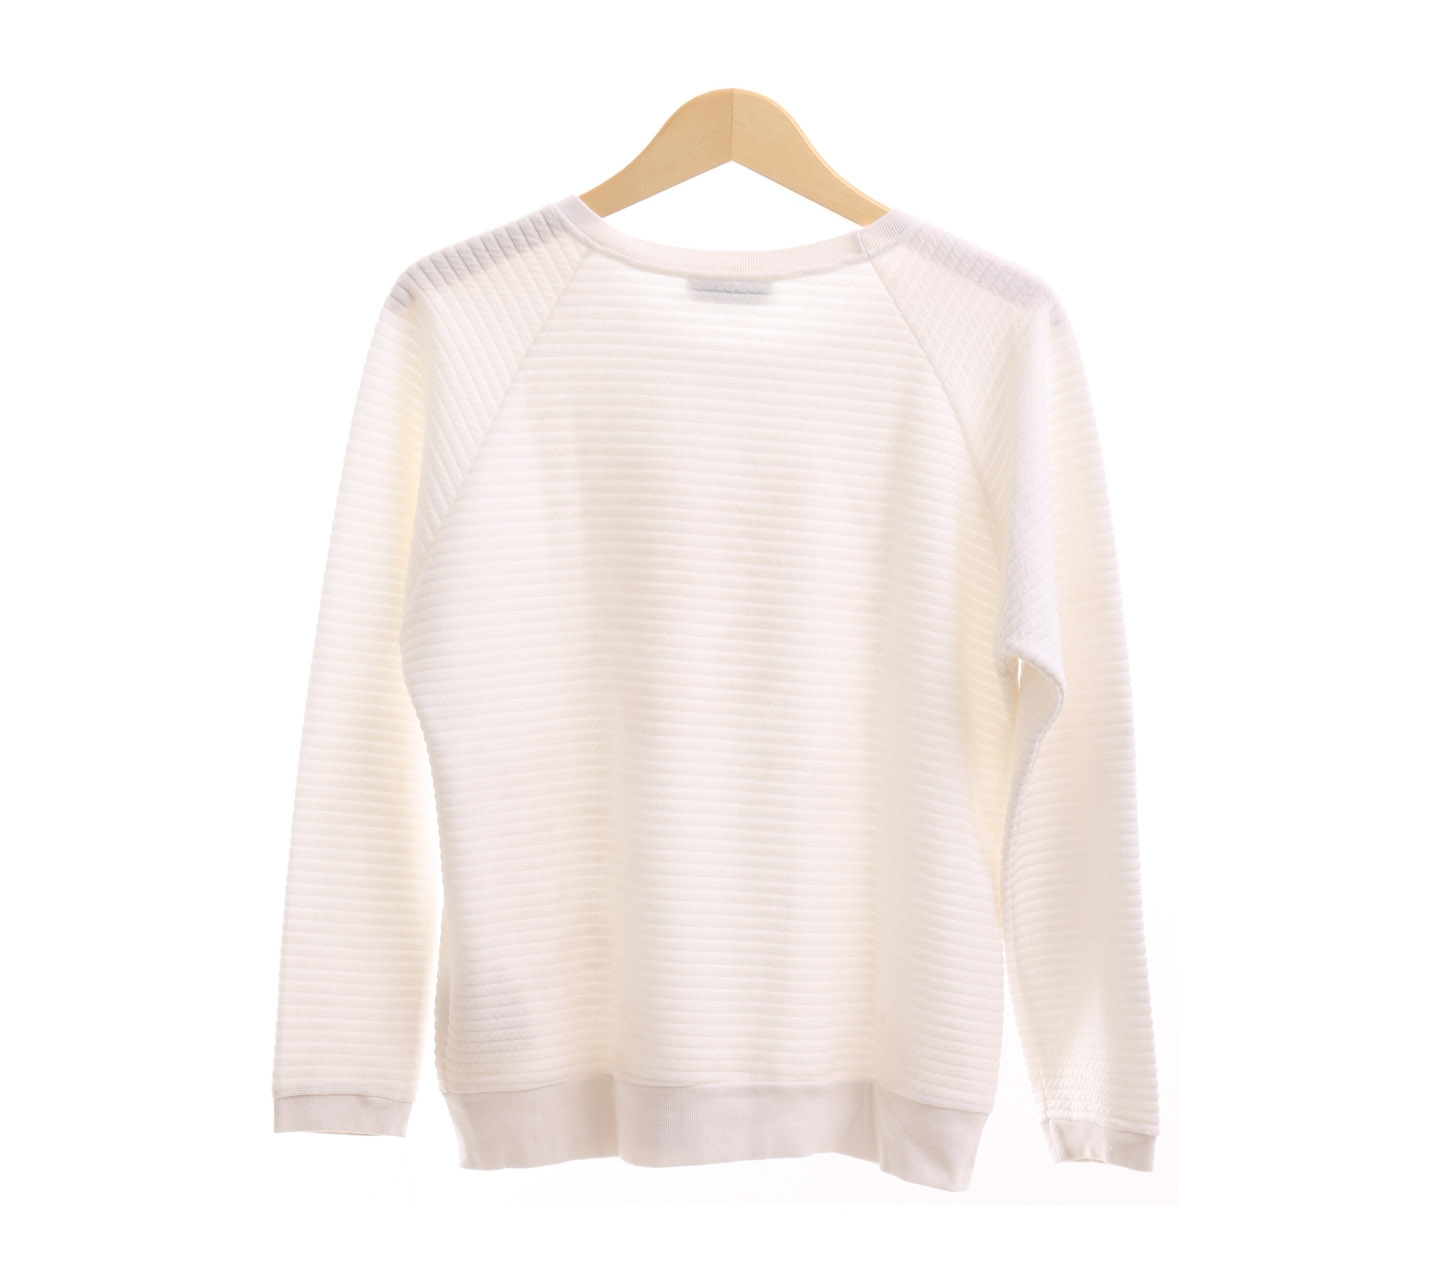 Cotton Ink White Sweater